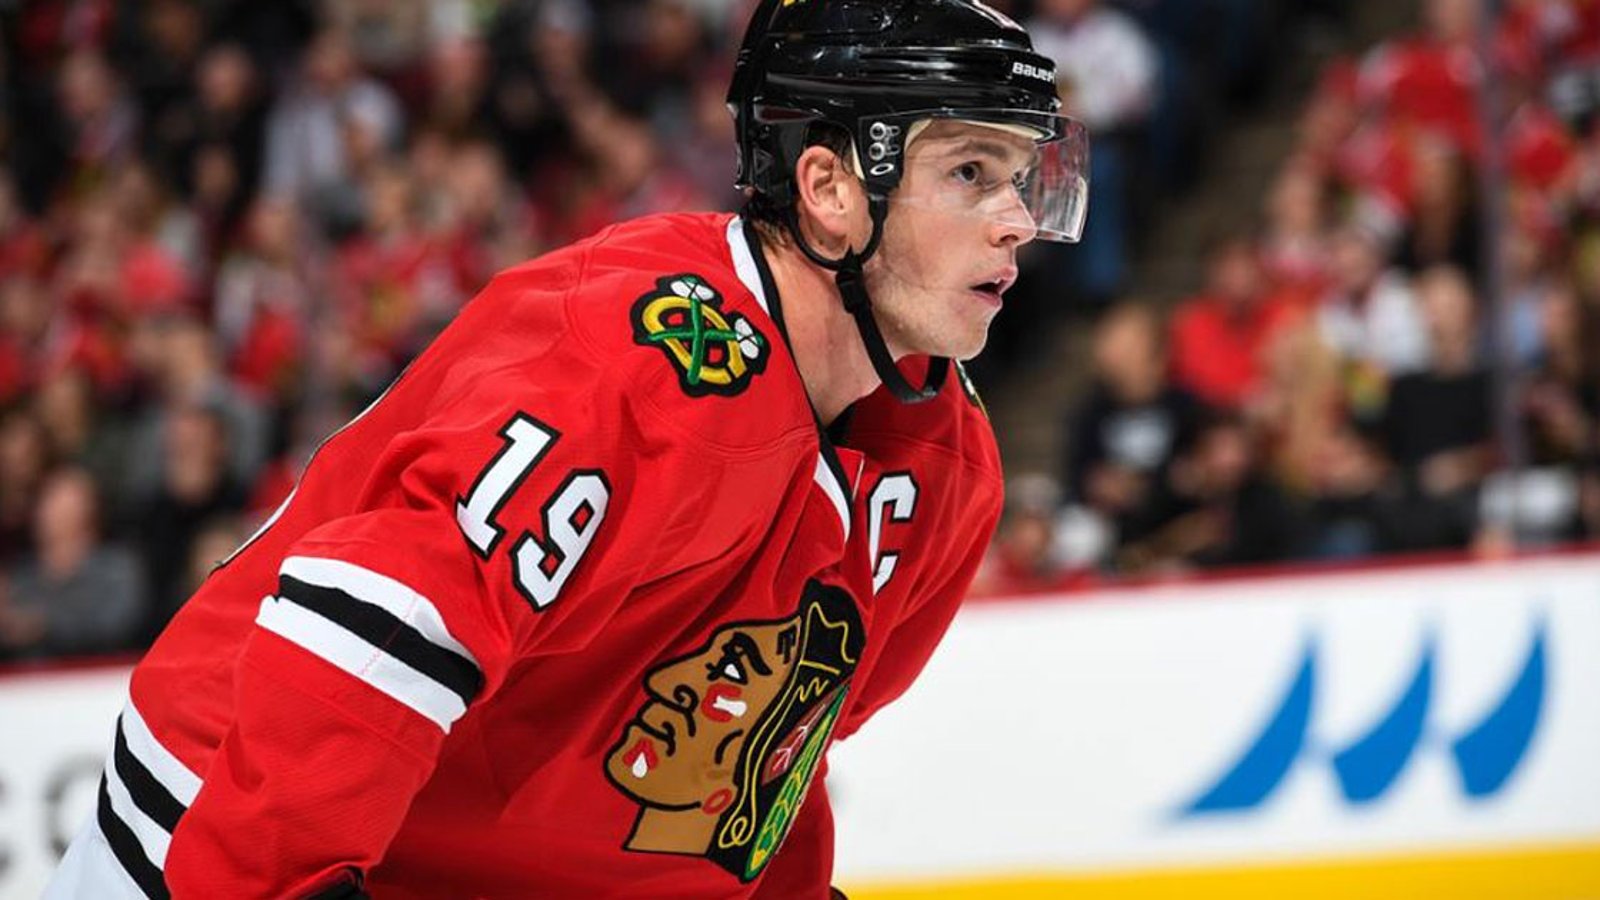 Must See: Jonathan Toews scores an AMAZING one-handed goal!